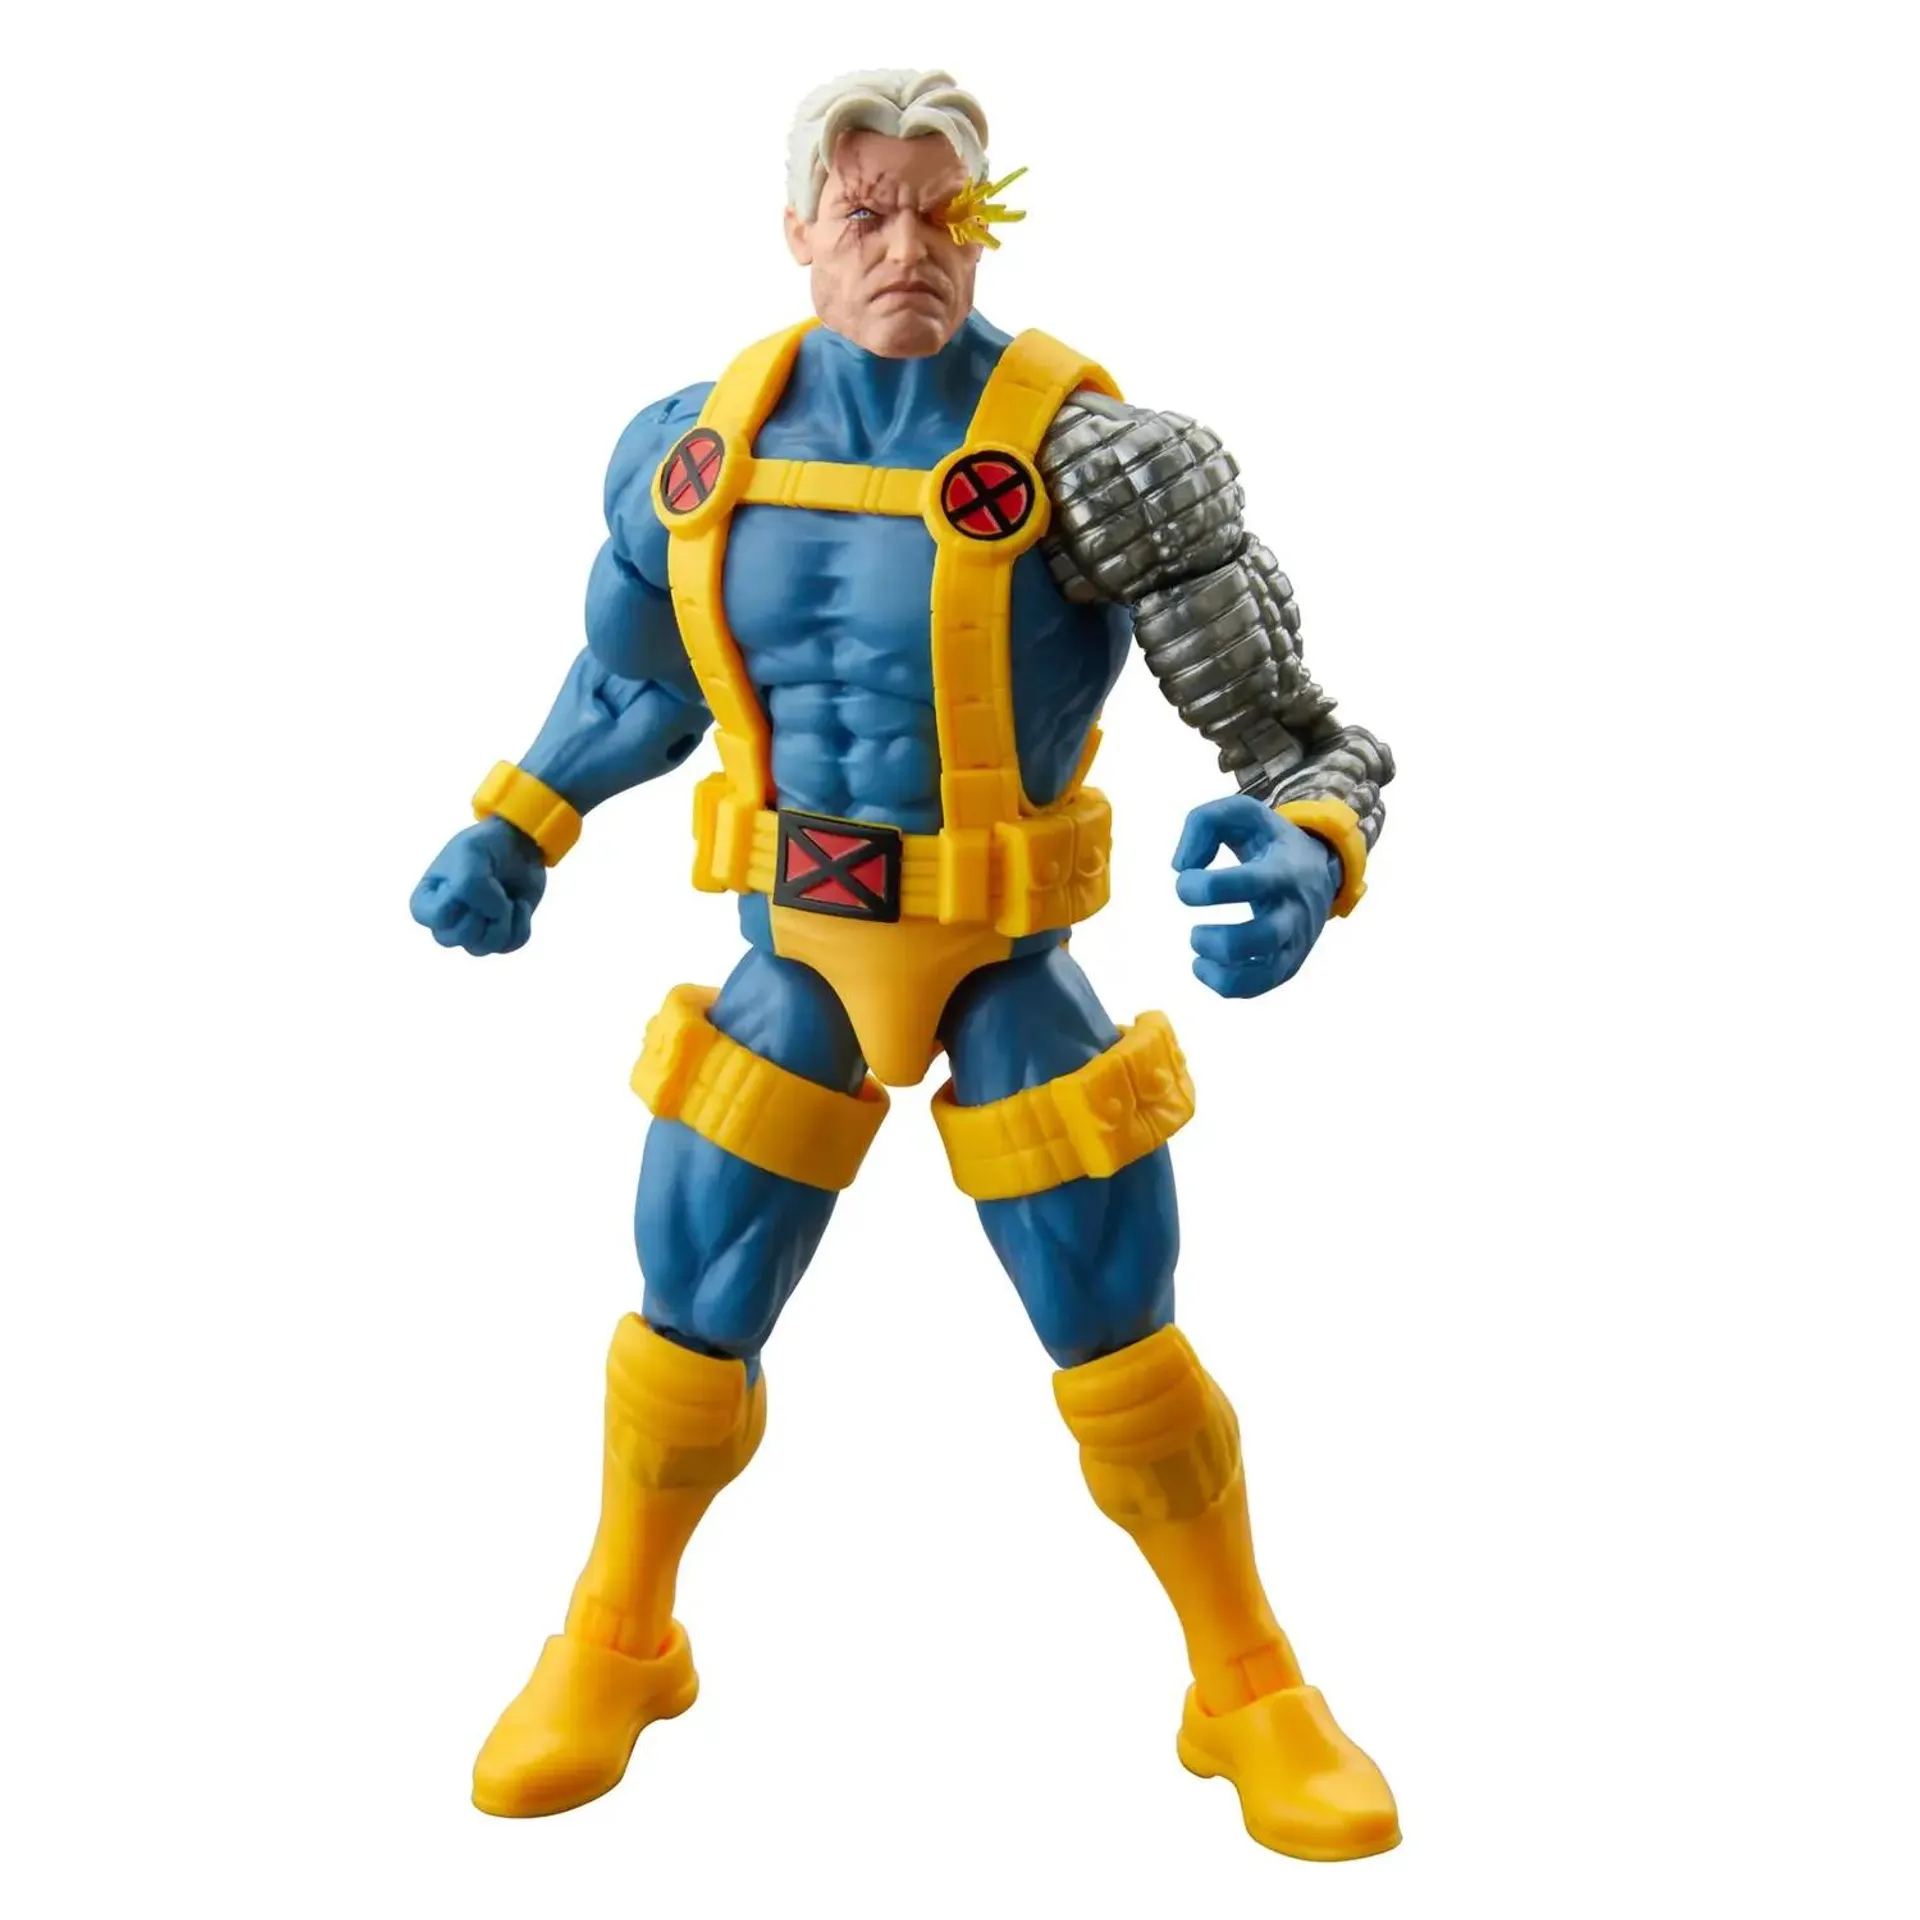 Hasbro Marvel Legends Series Marvel's Cable, 6" Comics Collectible Action Figure